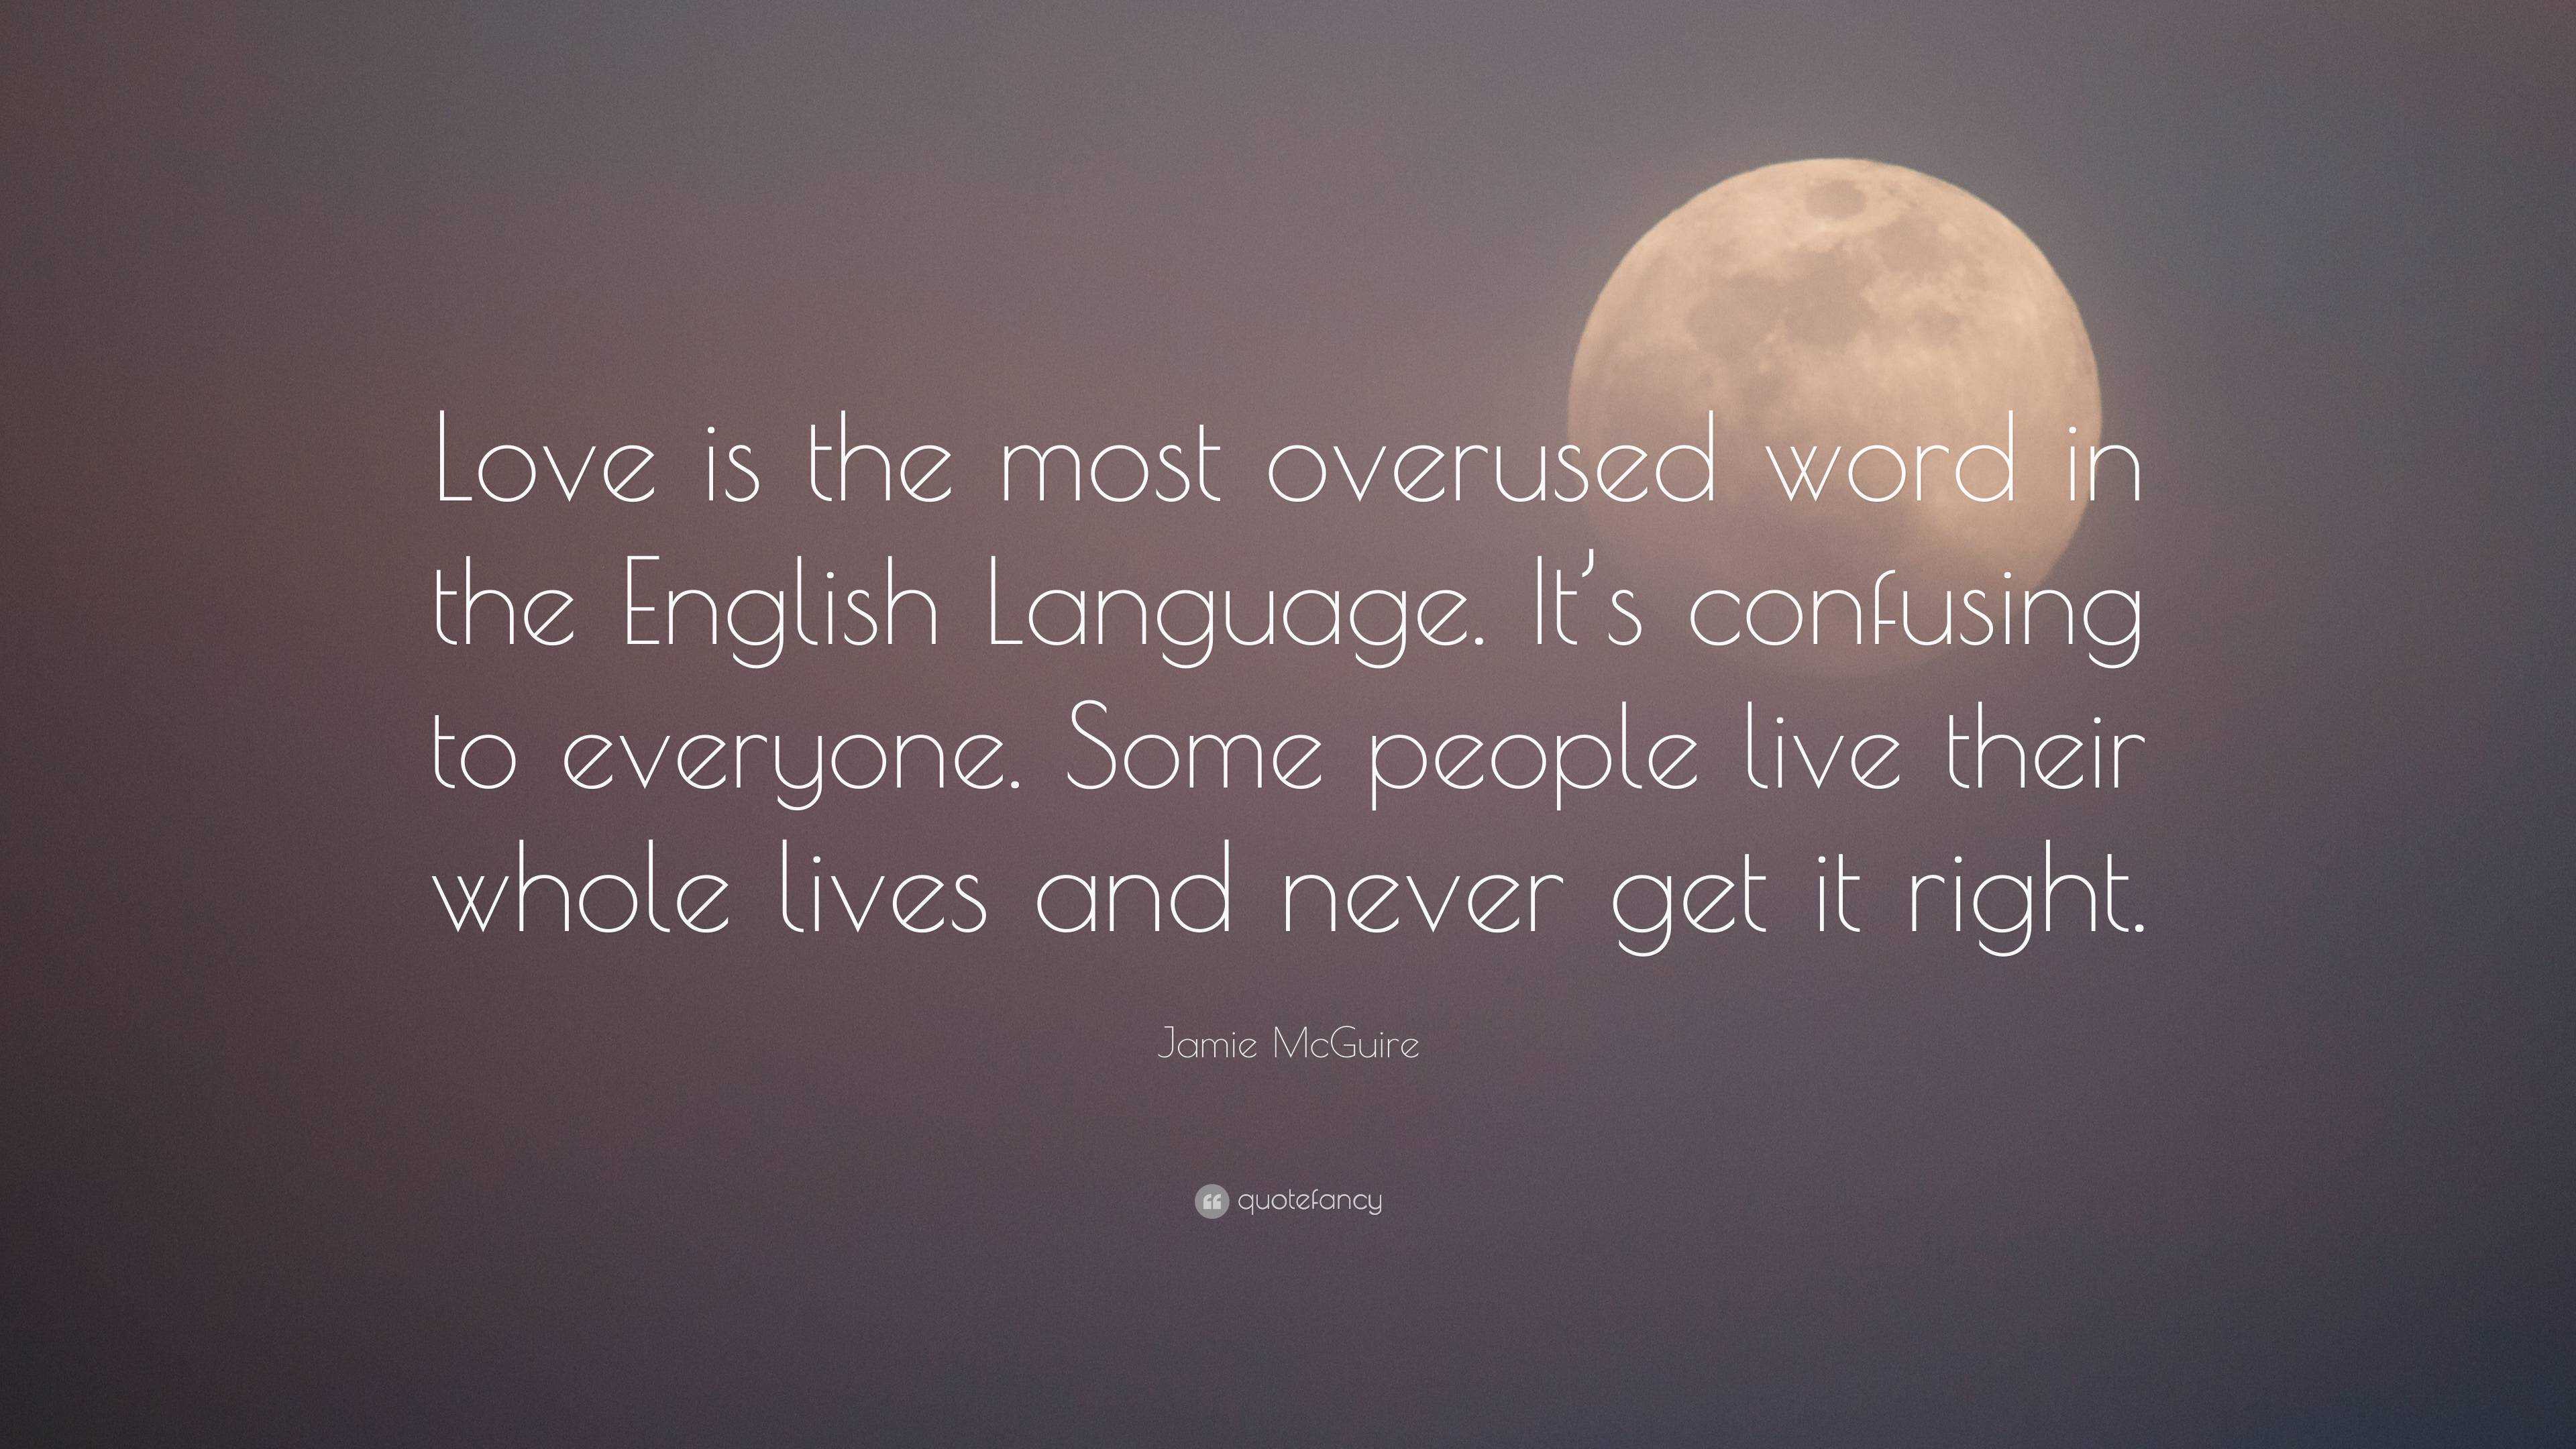 https://quotefancy.com/media/wallpaper/3840x2160/6635028-Jamie-McGuire-Quote-Love-is-the-most-overused-word-in-the-English.jpg